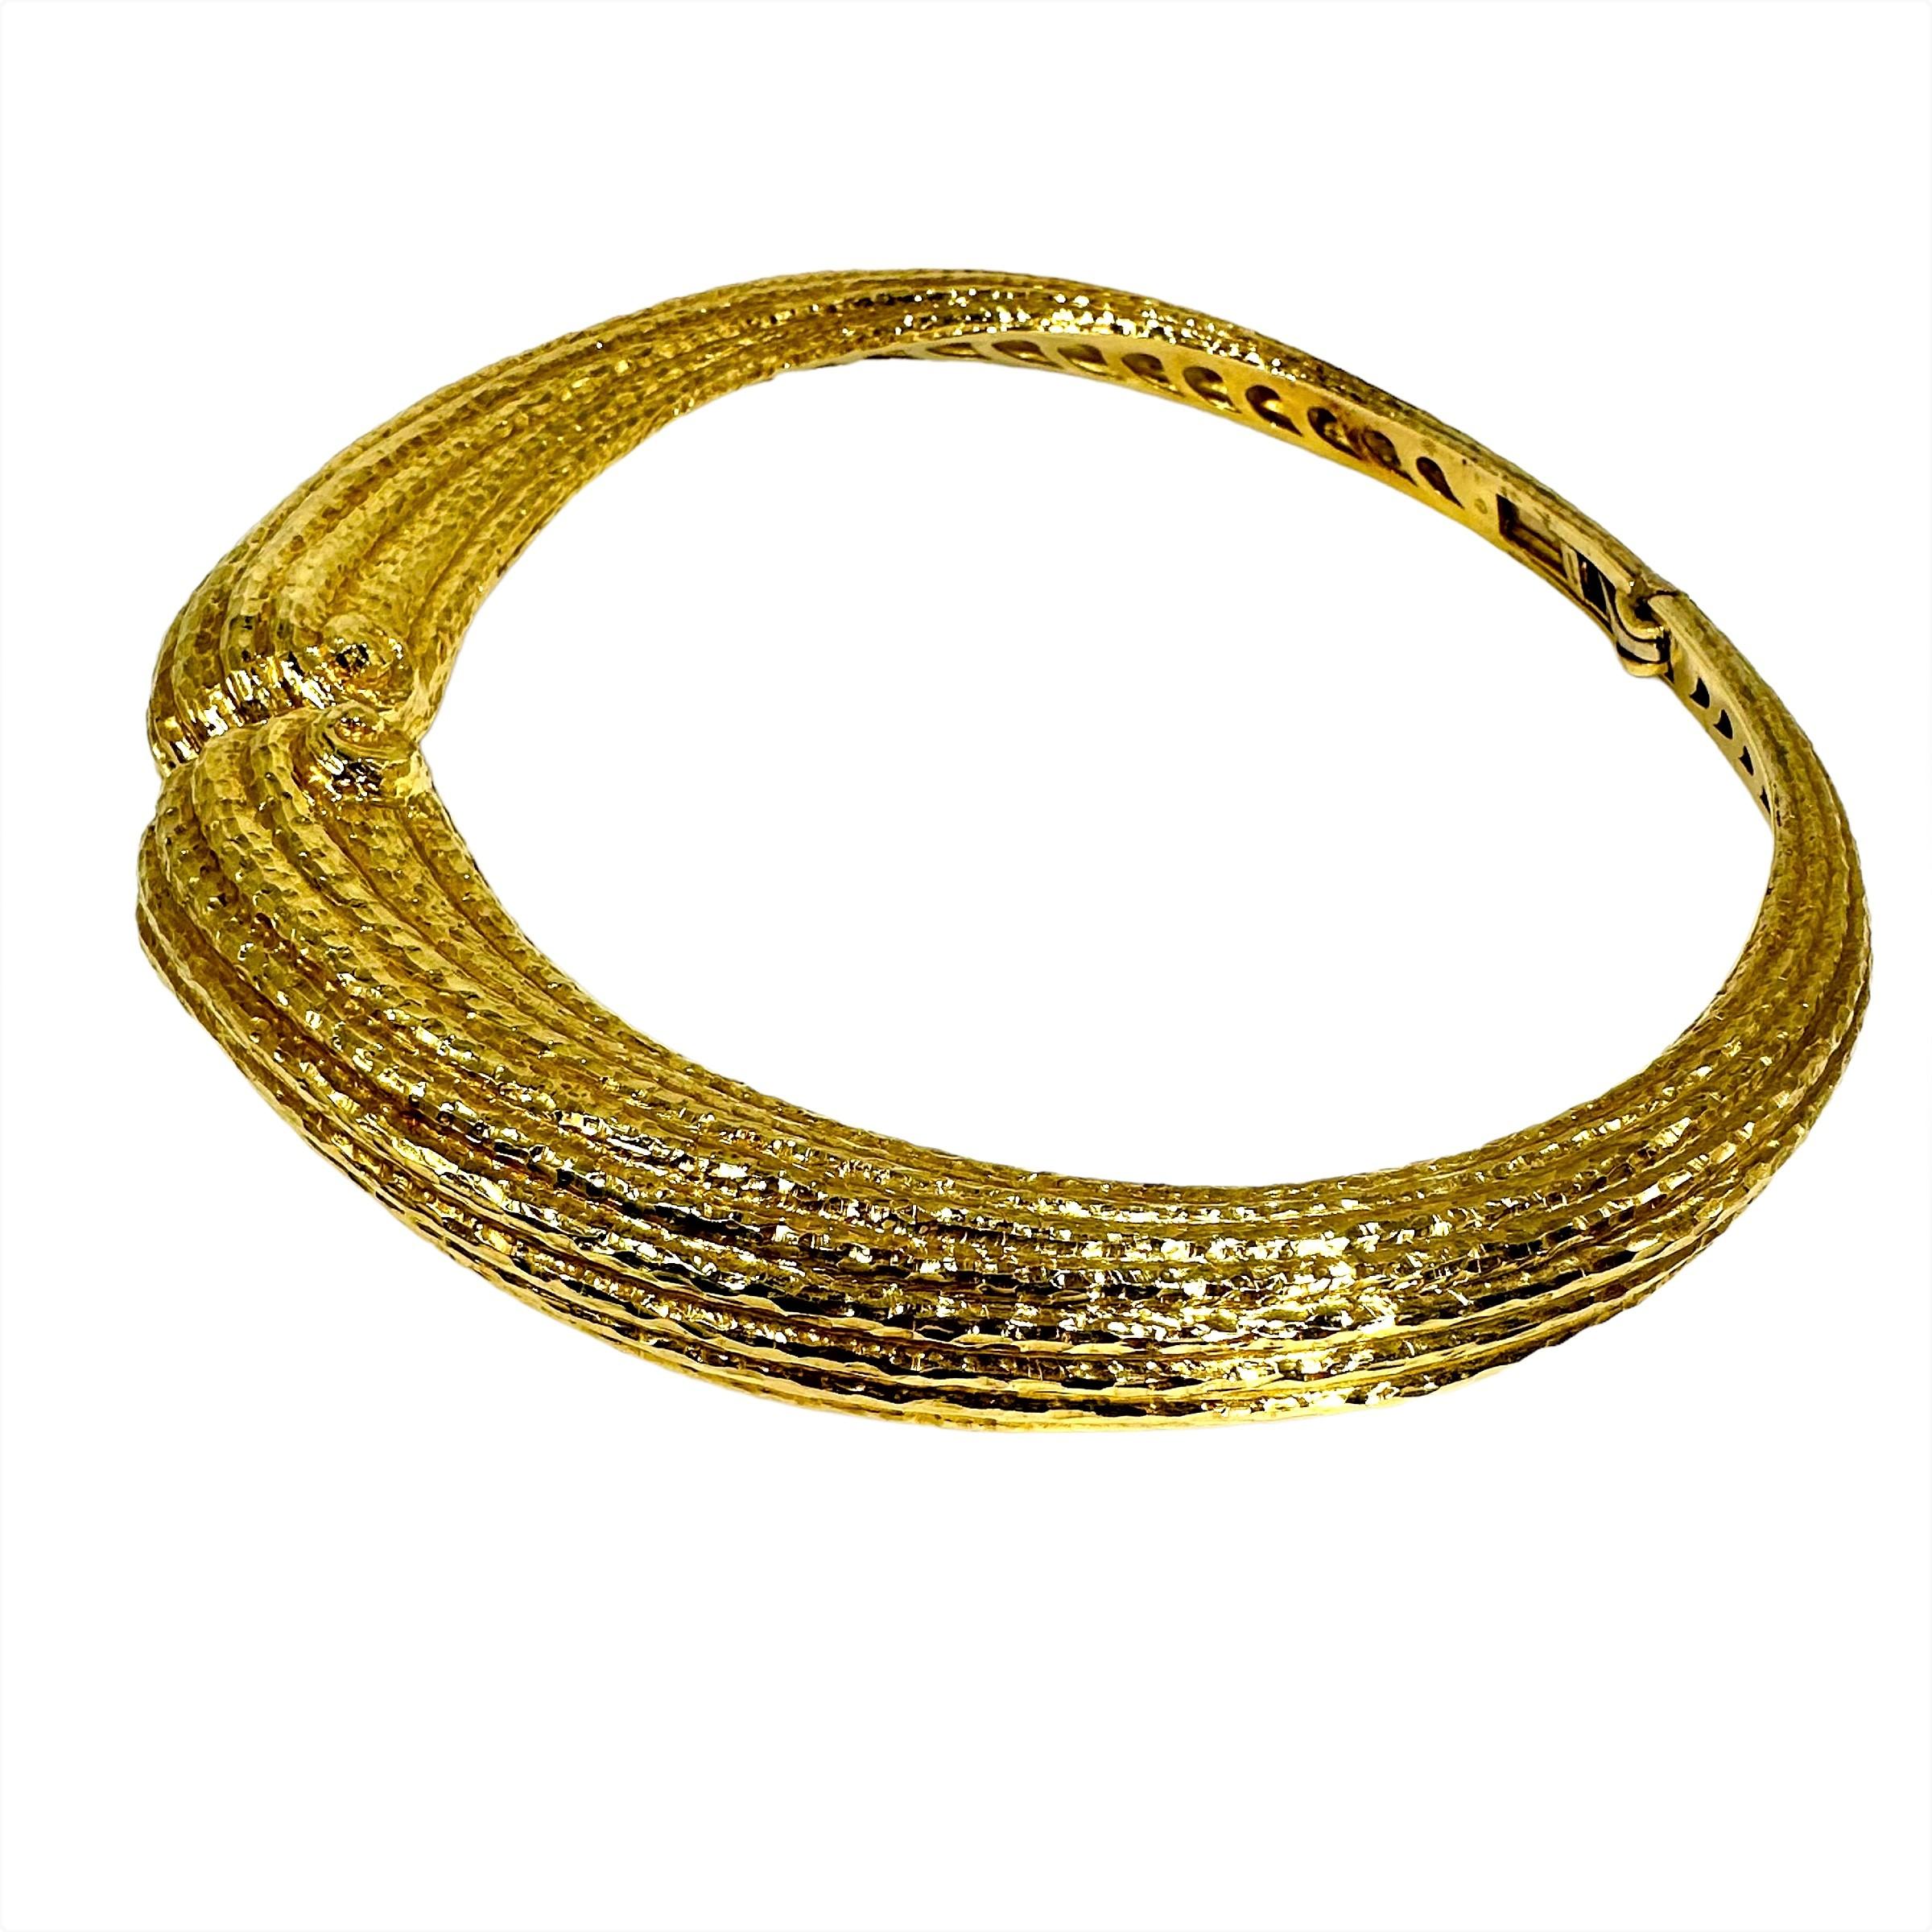 Massive 18K Yellow Gold, Hammered Finish, Italian Scroll Motif Choker Necklace In Good Condition For Sale In Palm Beach, FL